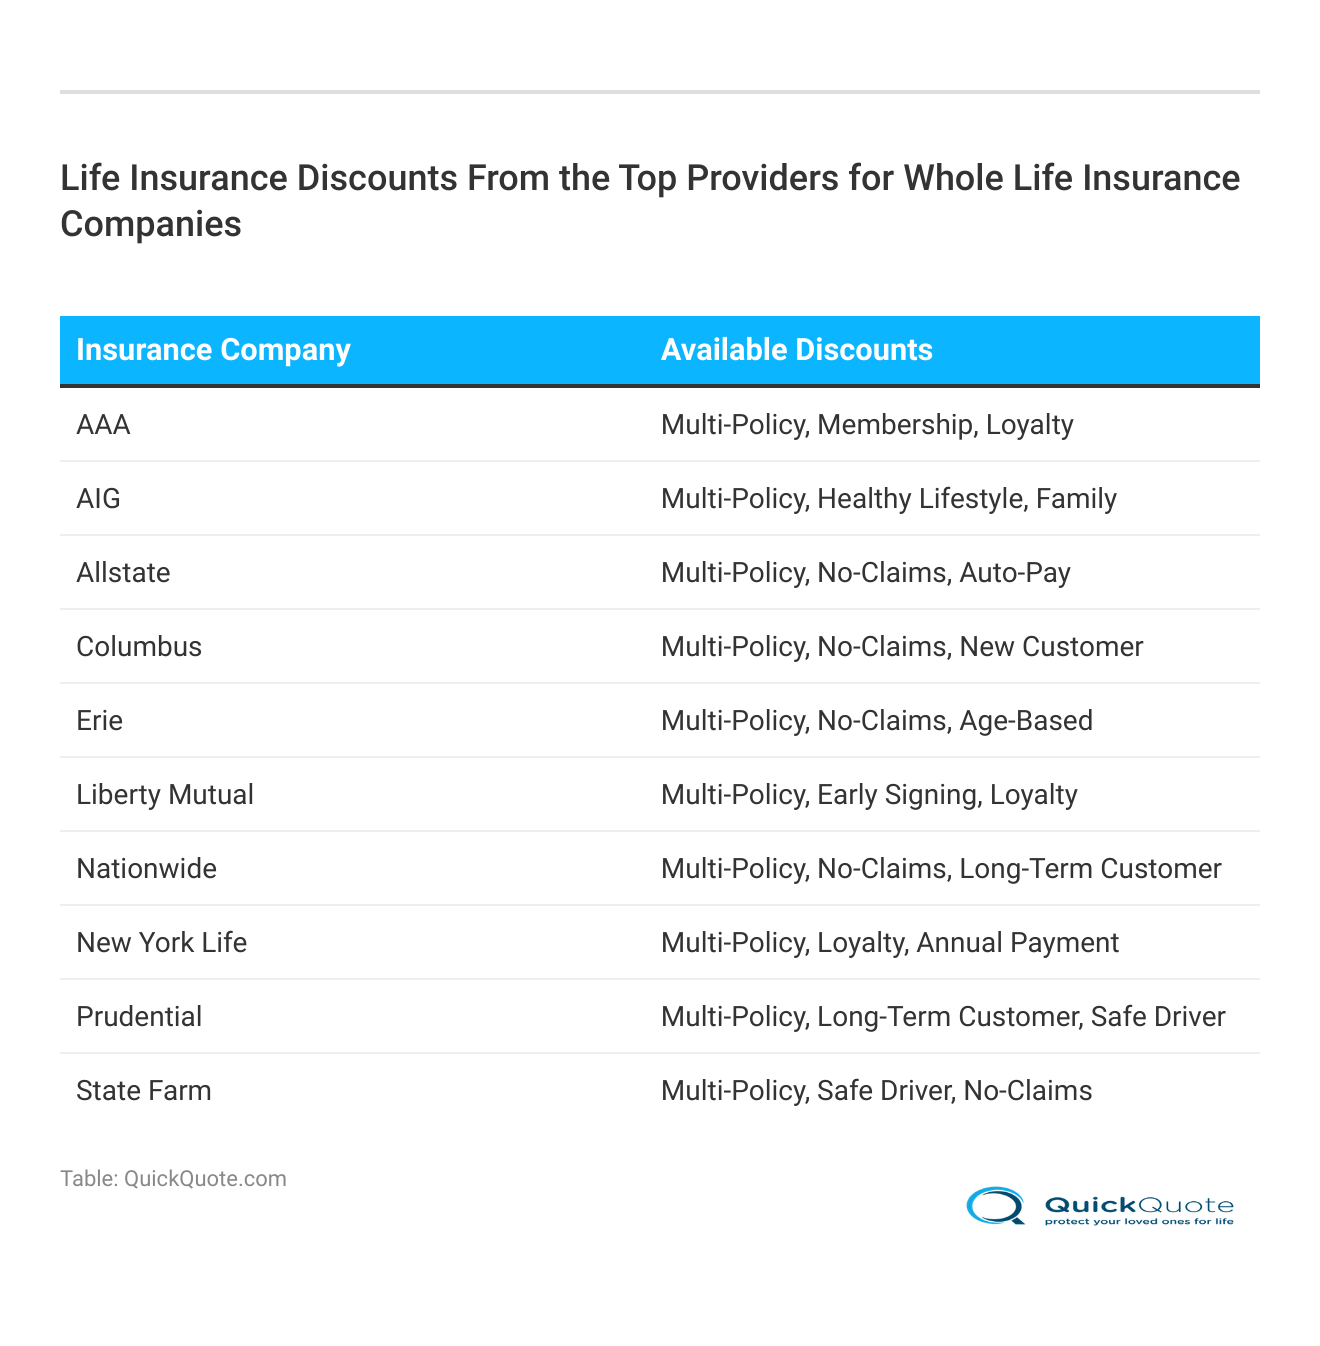 <h3>Life Insurance Discounts From the Top Providers for Whole Life Insurance Companies</h3>